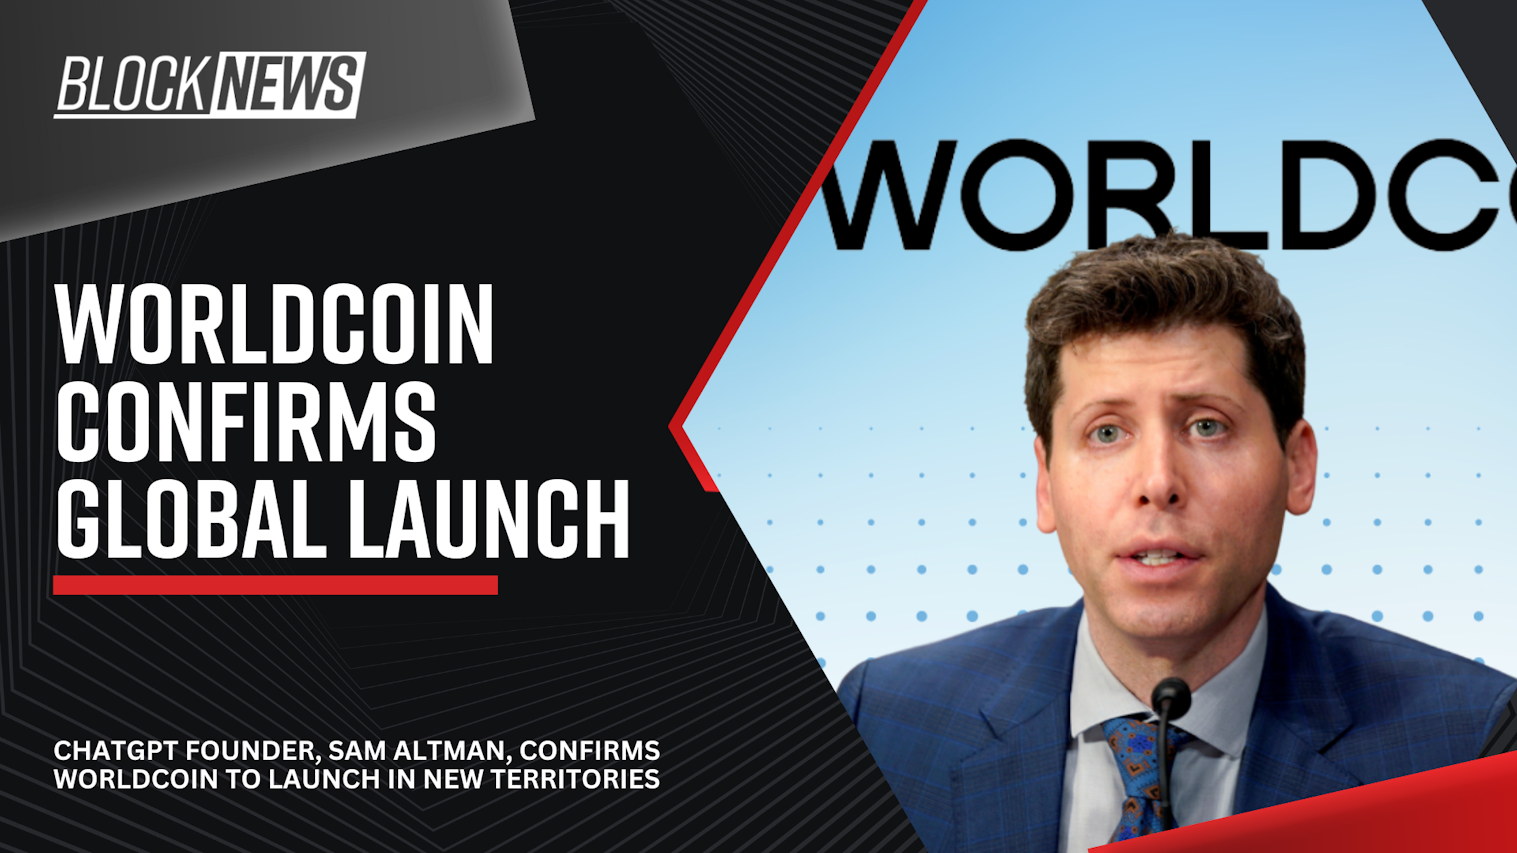 worldcoin-to-launch-new-territories